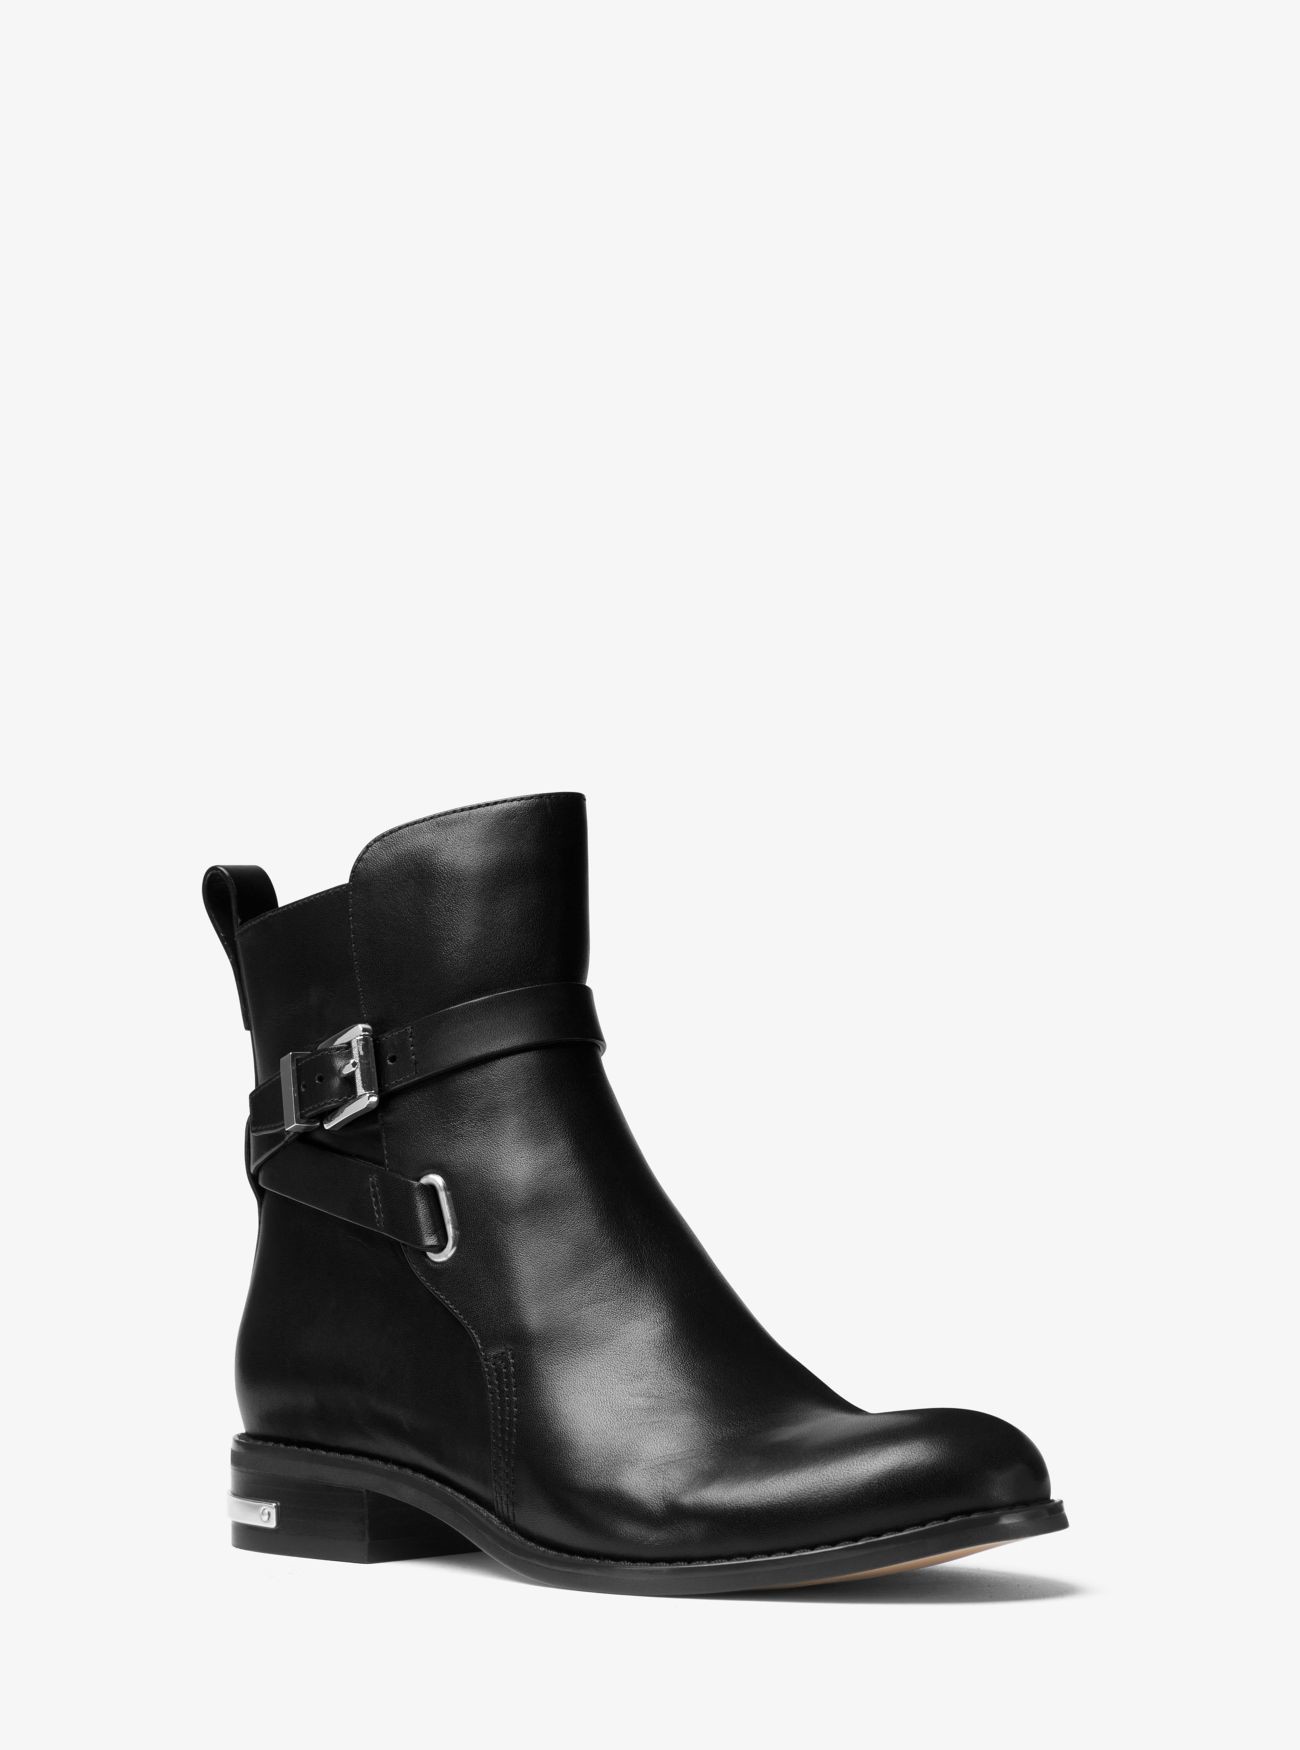 arley leather boot